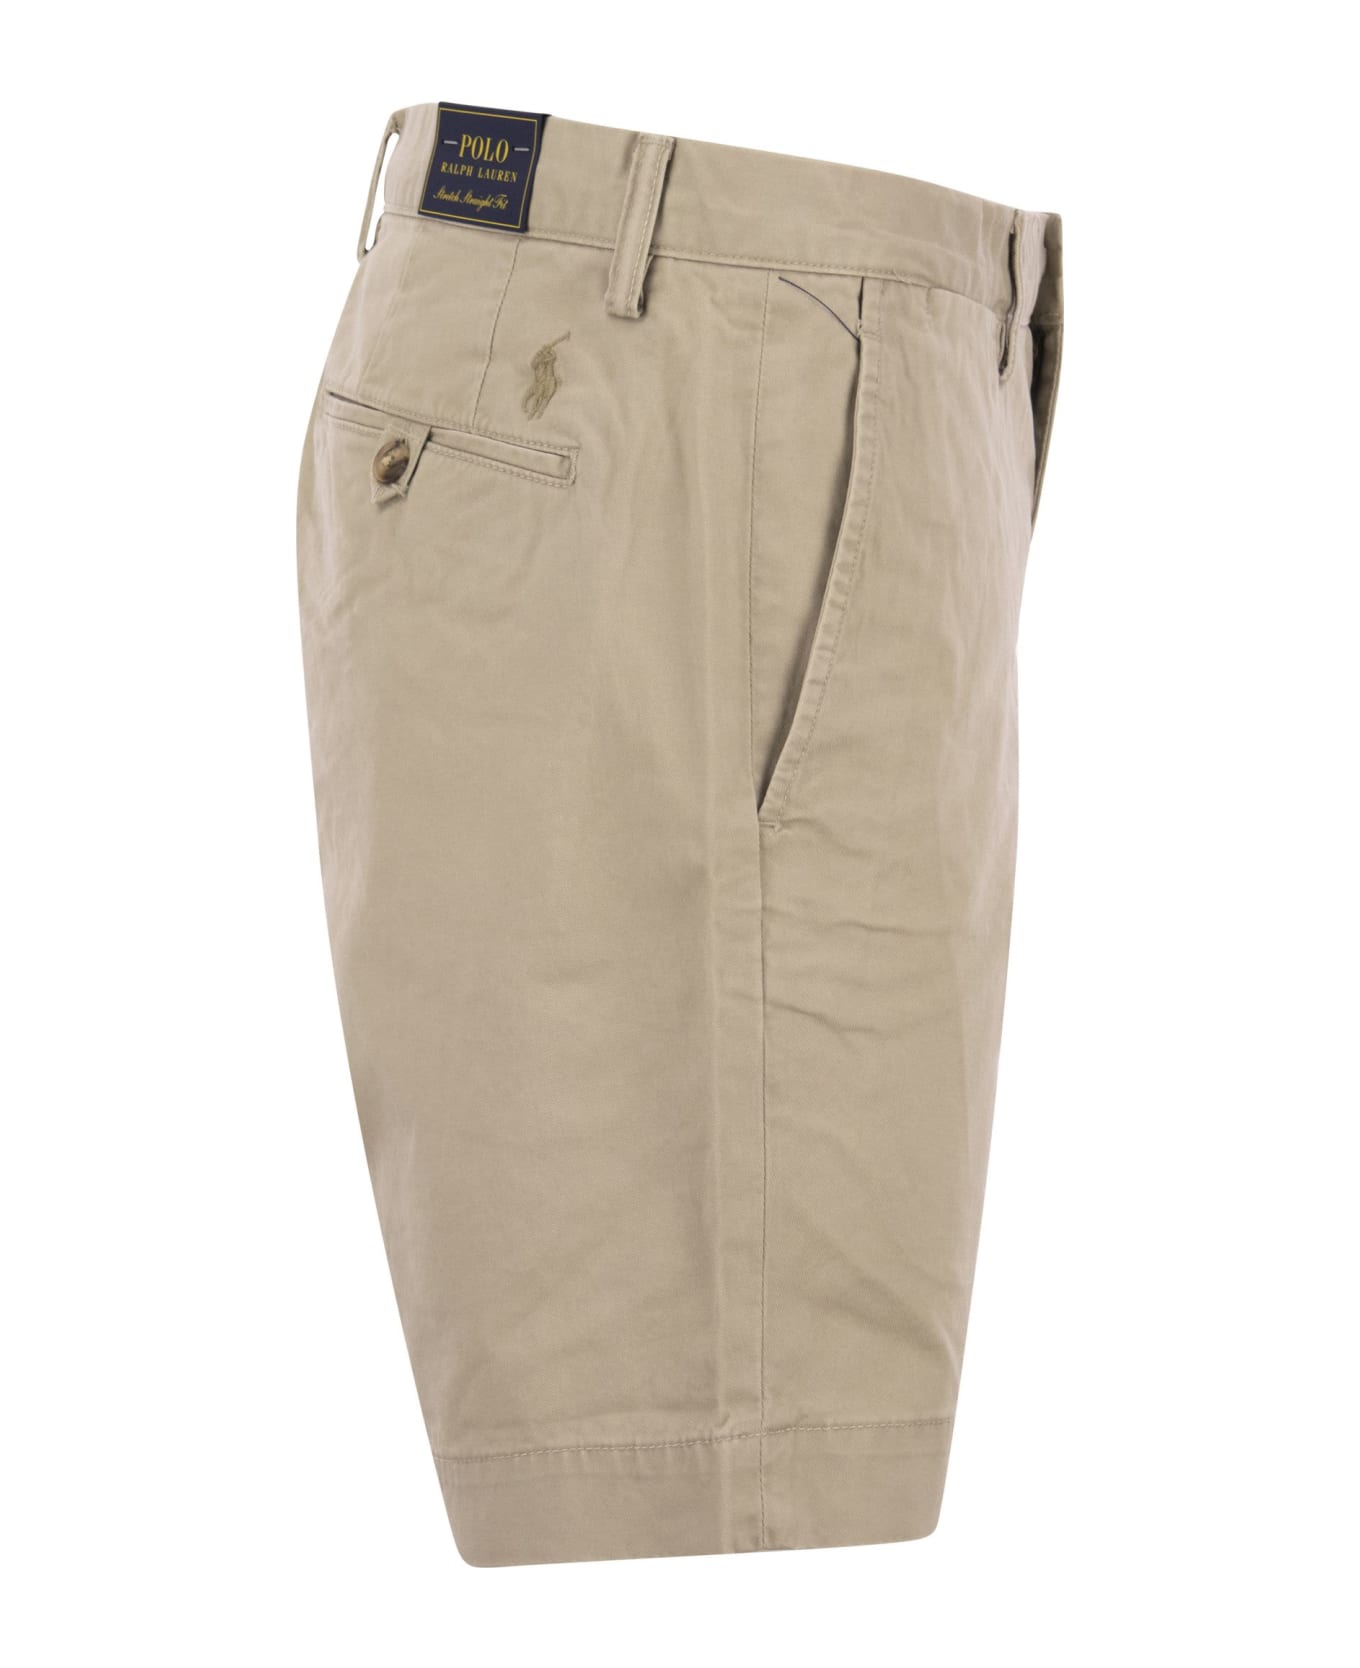 Polo Ralph Lauren Stretch Classic Fit Chino Short - Beige